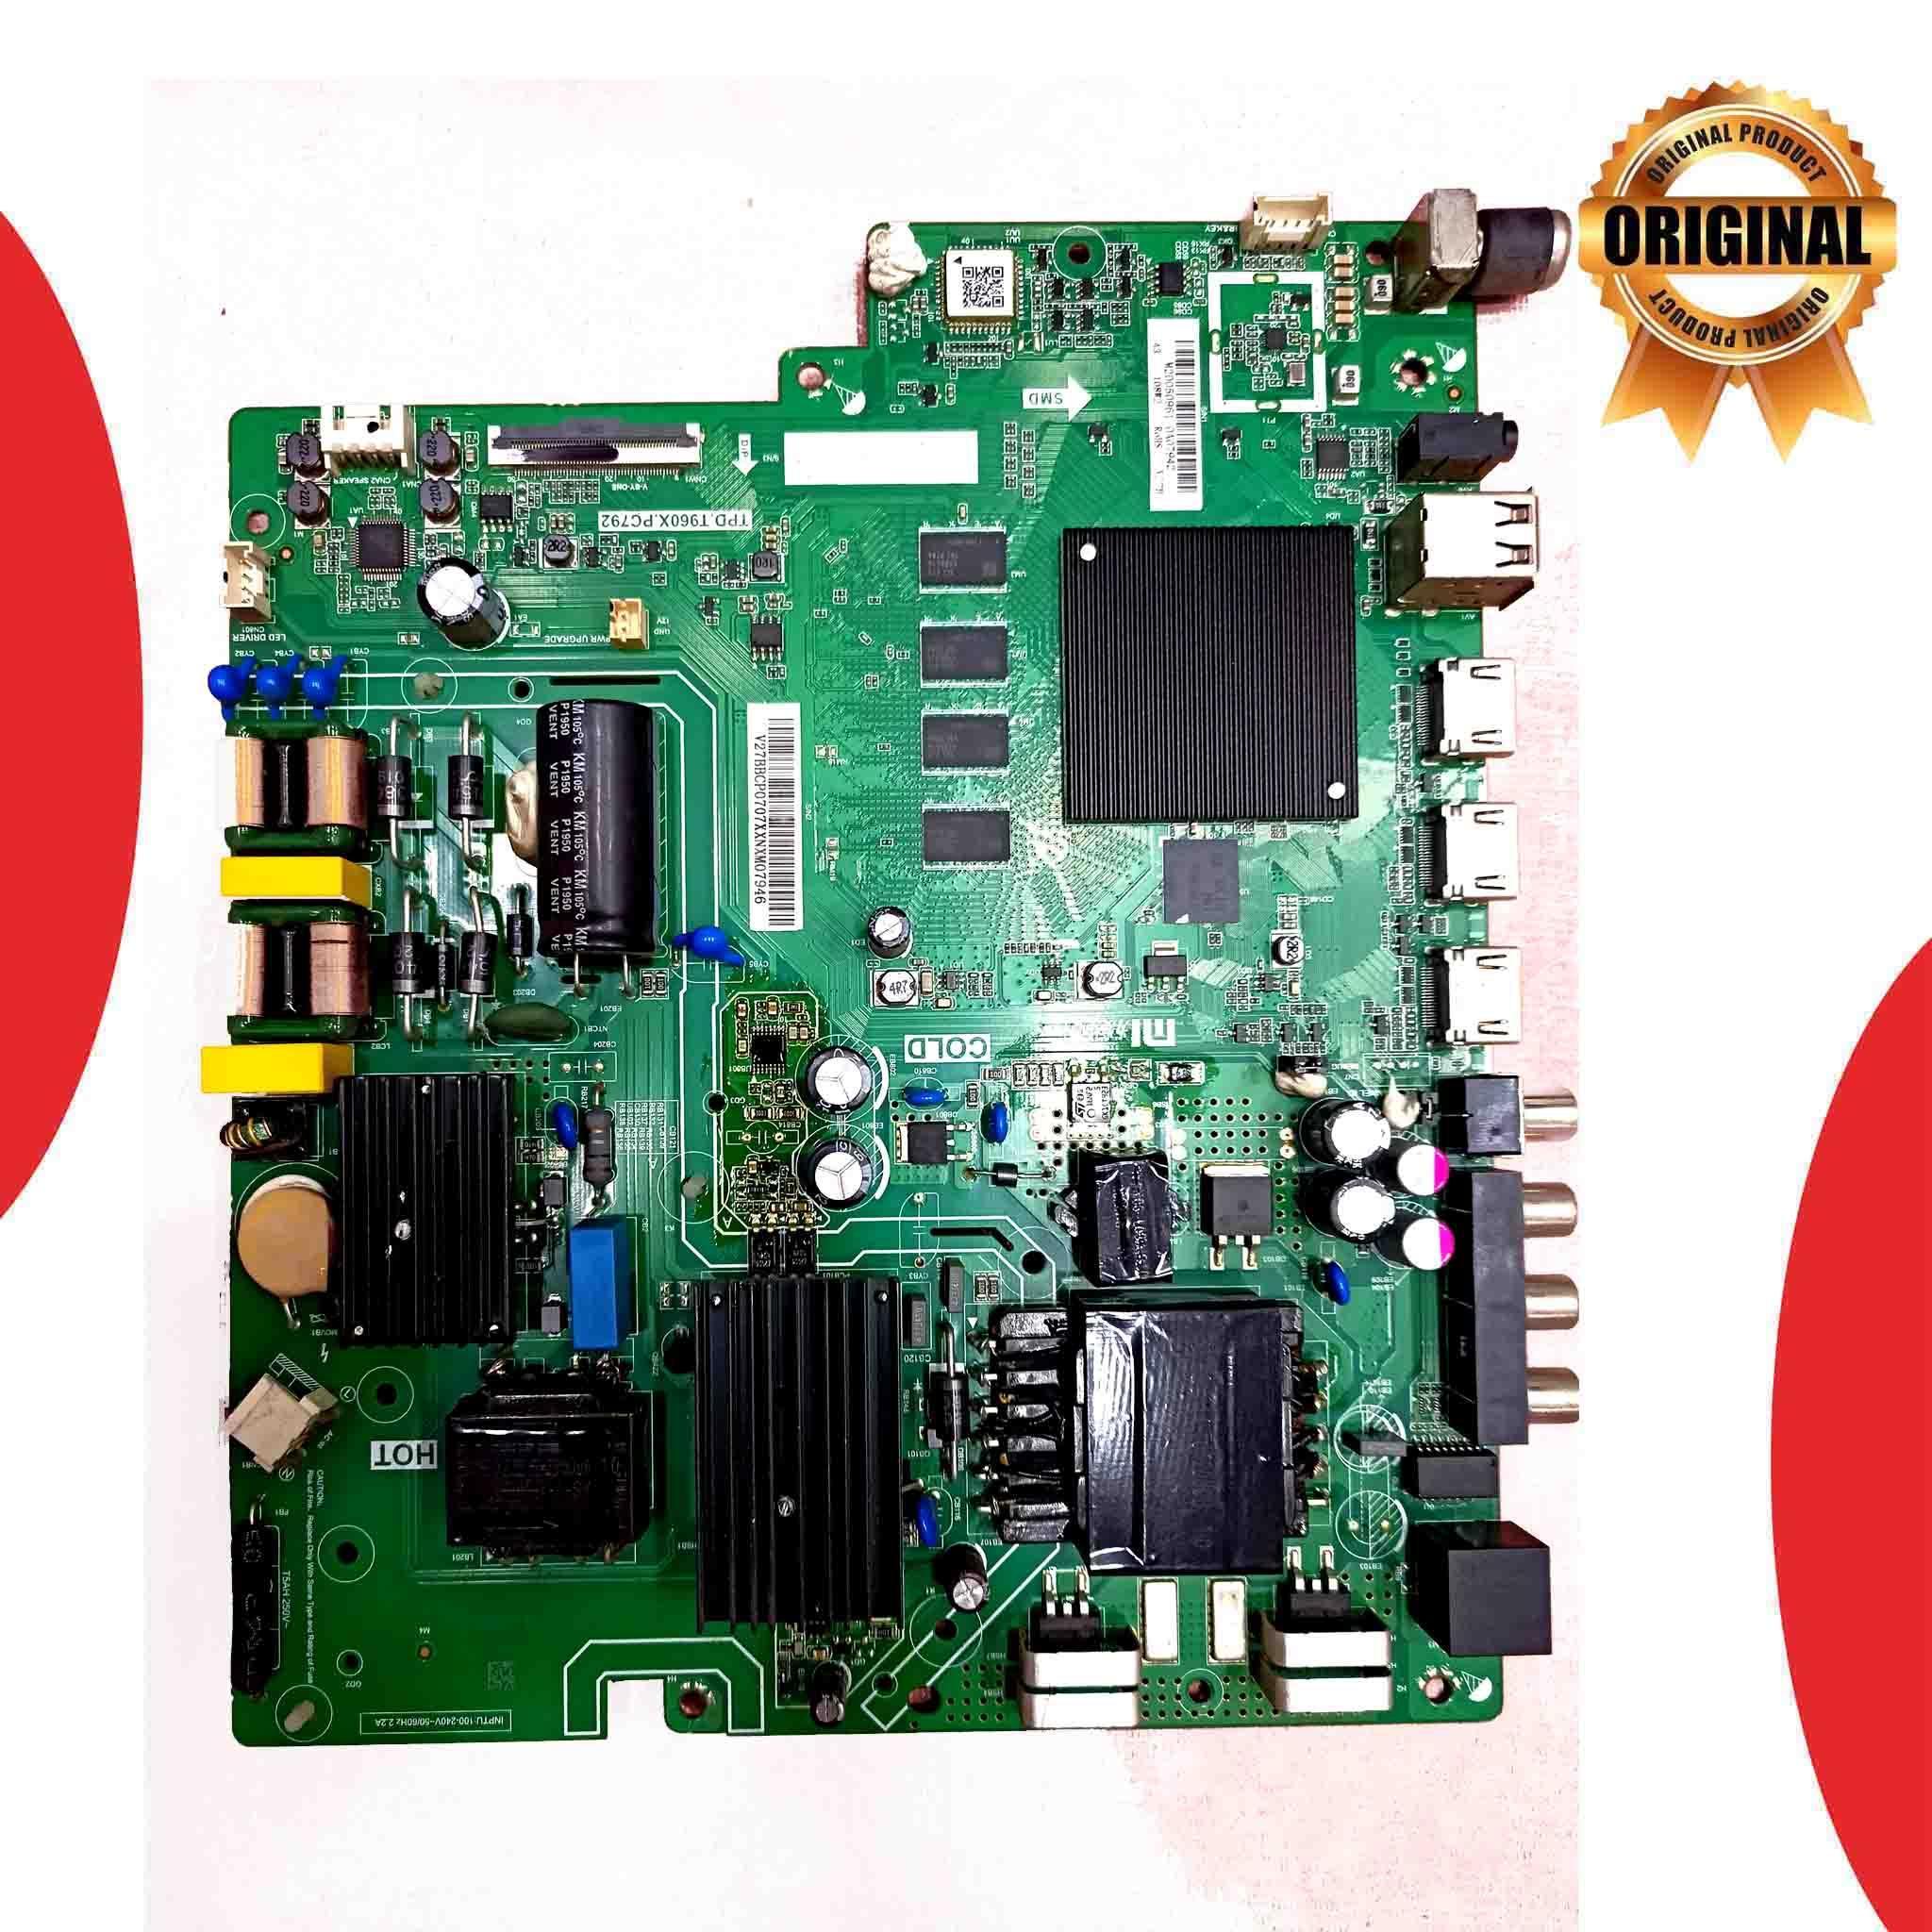 Mi 43 inch LED TV Motherboard for Model L43M5-4AIN - Great Bharat Electronics